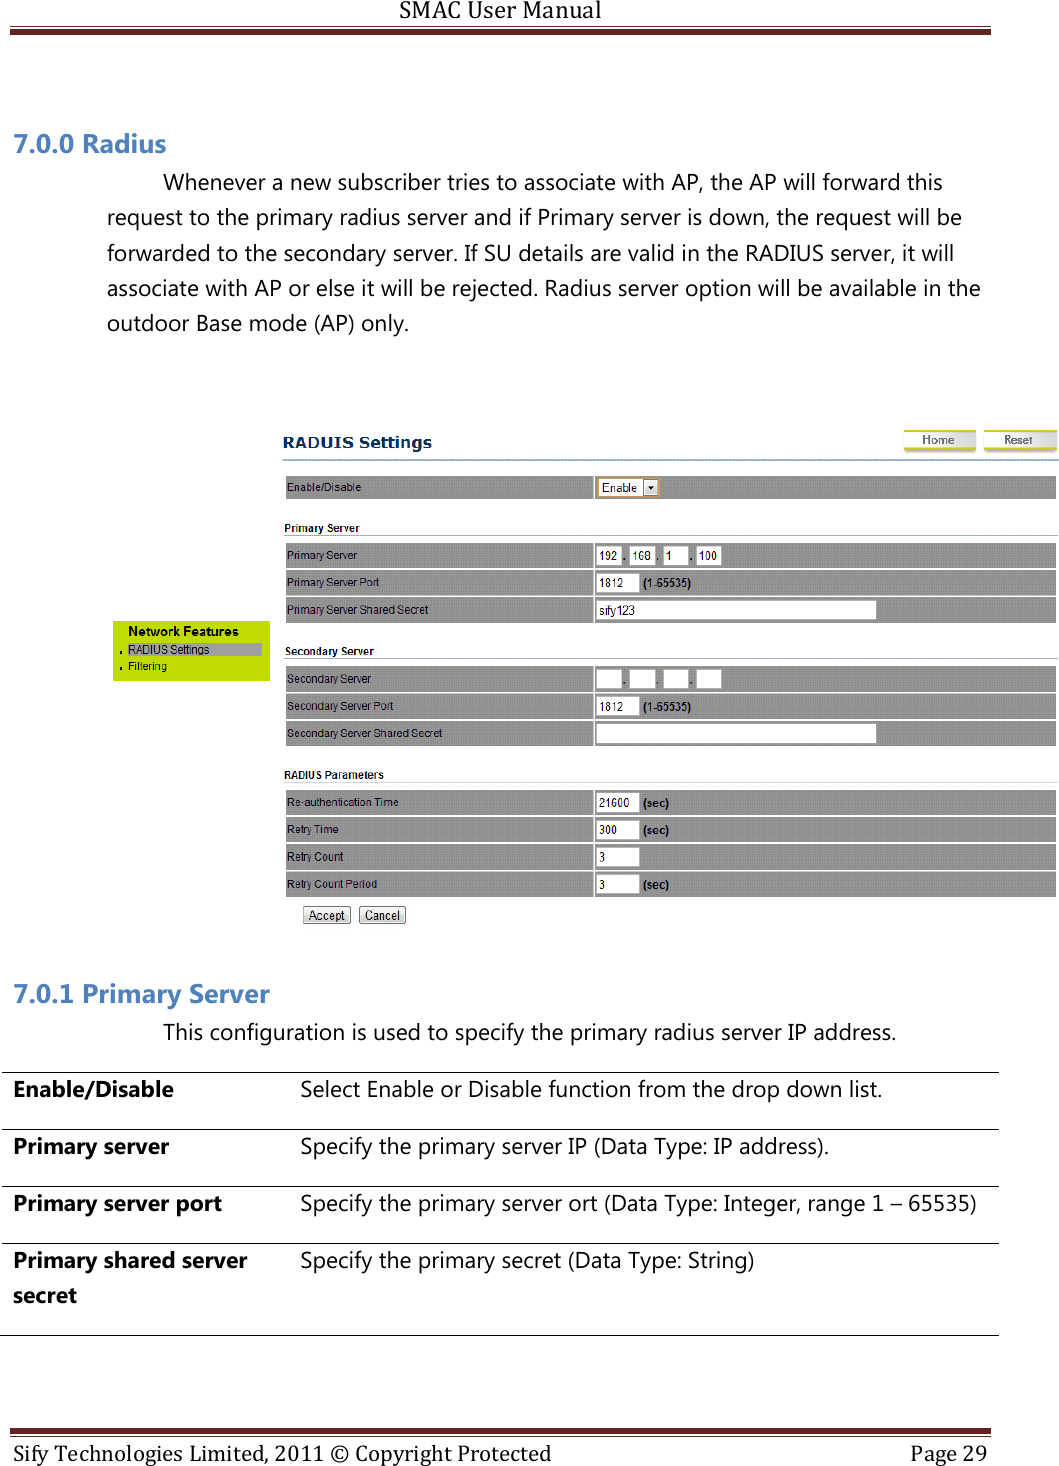 SMAC User Manual  Sify Technologies Limited, 2011 © Copyright Protected  Page 29   7.0.0 Radius Whenever a new subscriber tries to associate with AP, the AP will forward this request to the primary radius server and if Primary server is down, the request will be forwarded to the secondary server. If SU details are valid in the RADIUS server, it will associate with AP or else it will be rejected. Radius server option will be available in the outdoor Base mode (AP) only.   7.0.1 Primary Server  This configuration is used to specify the primary radius server IP address.  Enable/Disable Select Enable or Disable function from the drop down list. Primary server Specify the primary server IP (Data Type: IP address). Primary server port Specify the primary server ort (Data Type: Integer, range 1 – 65535) Primary shared server secret Specify the primary secret (Data Type: String)  